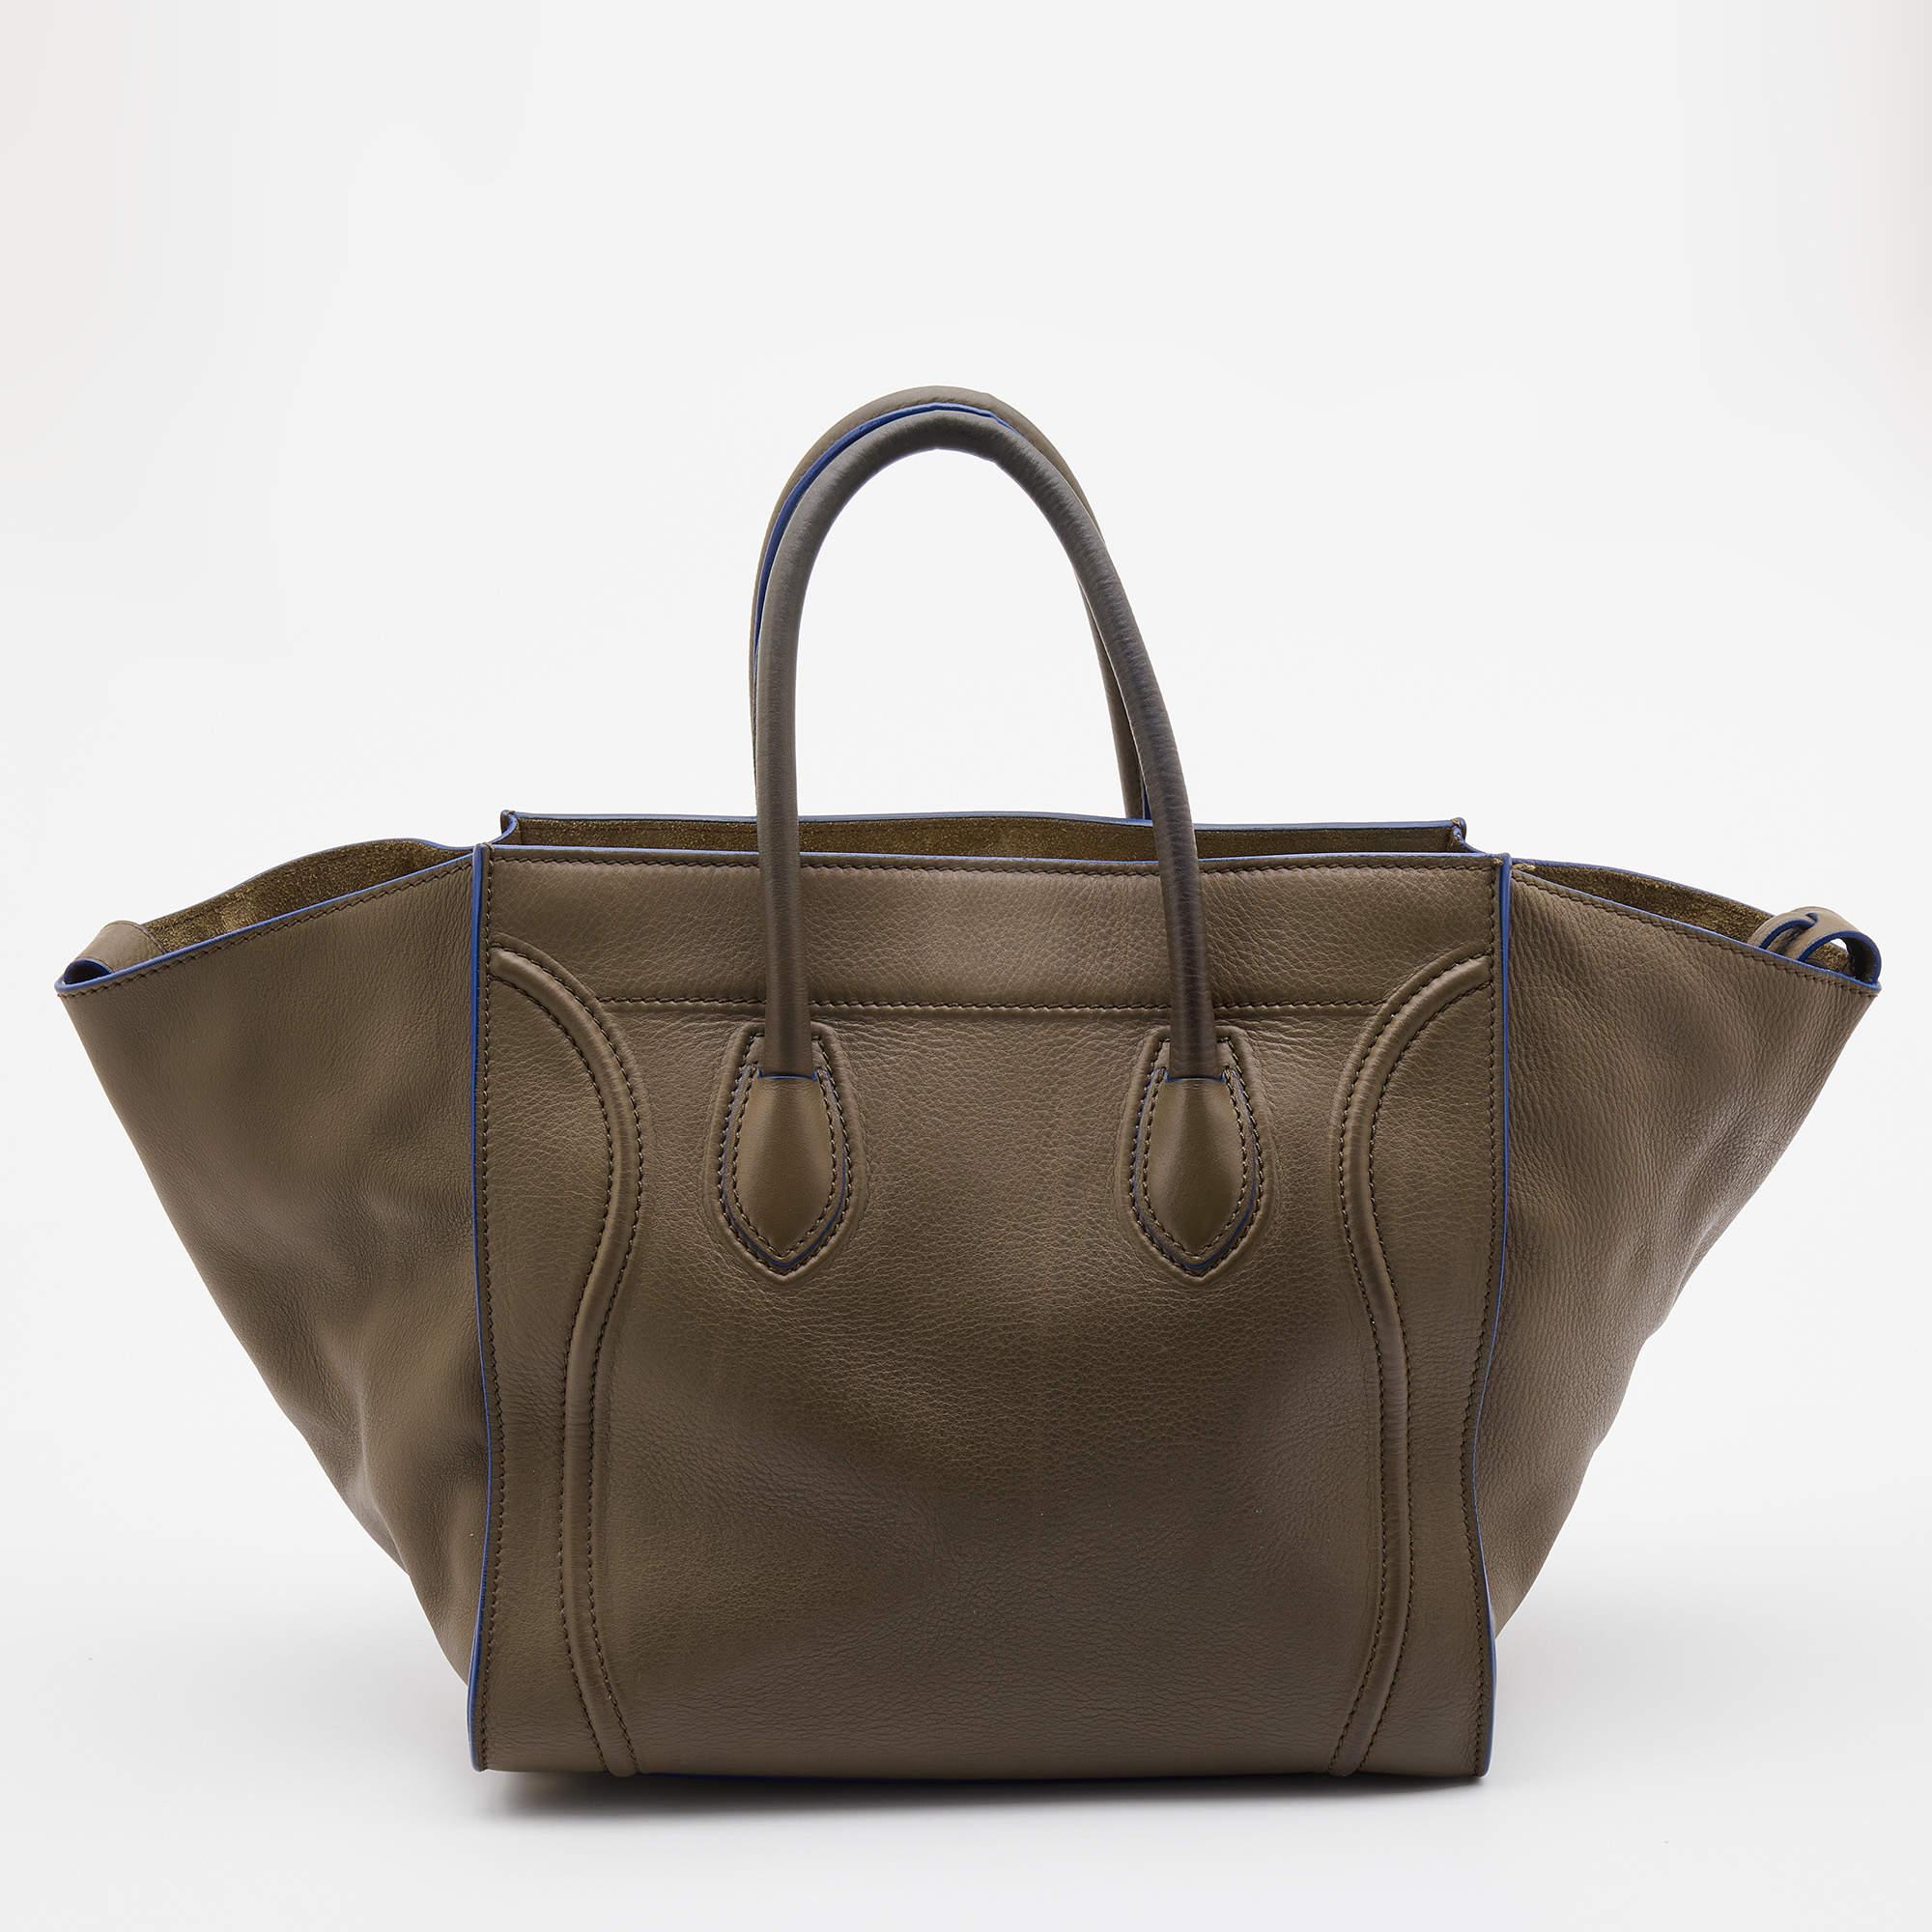 This authentic Celine tote for women is super classy and functional, perfect for everyday use. We like the simple details and its high-quality finish.

Includes: Original Dustbag
